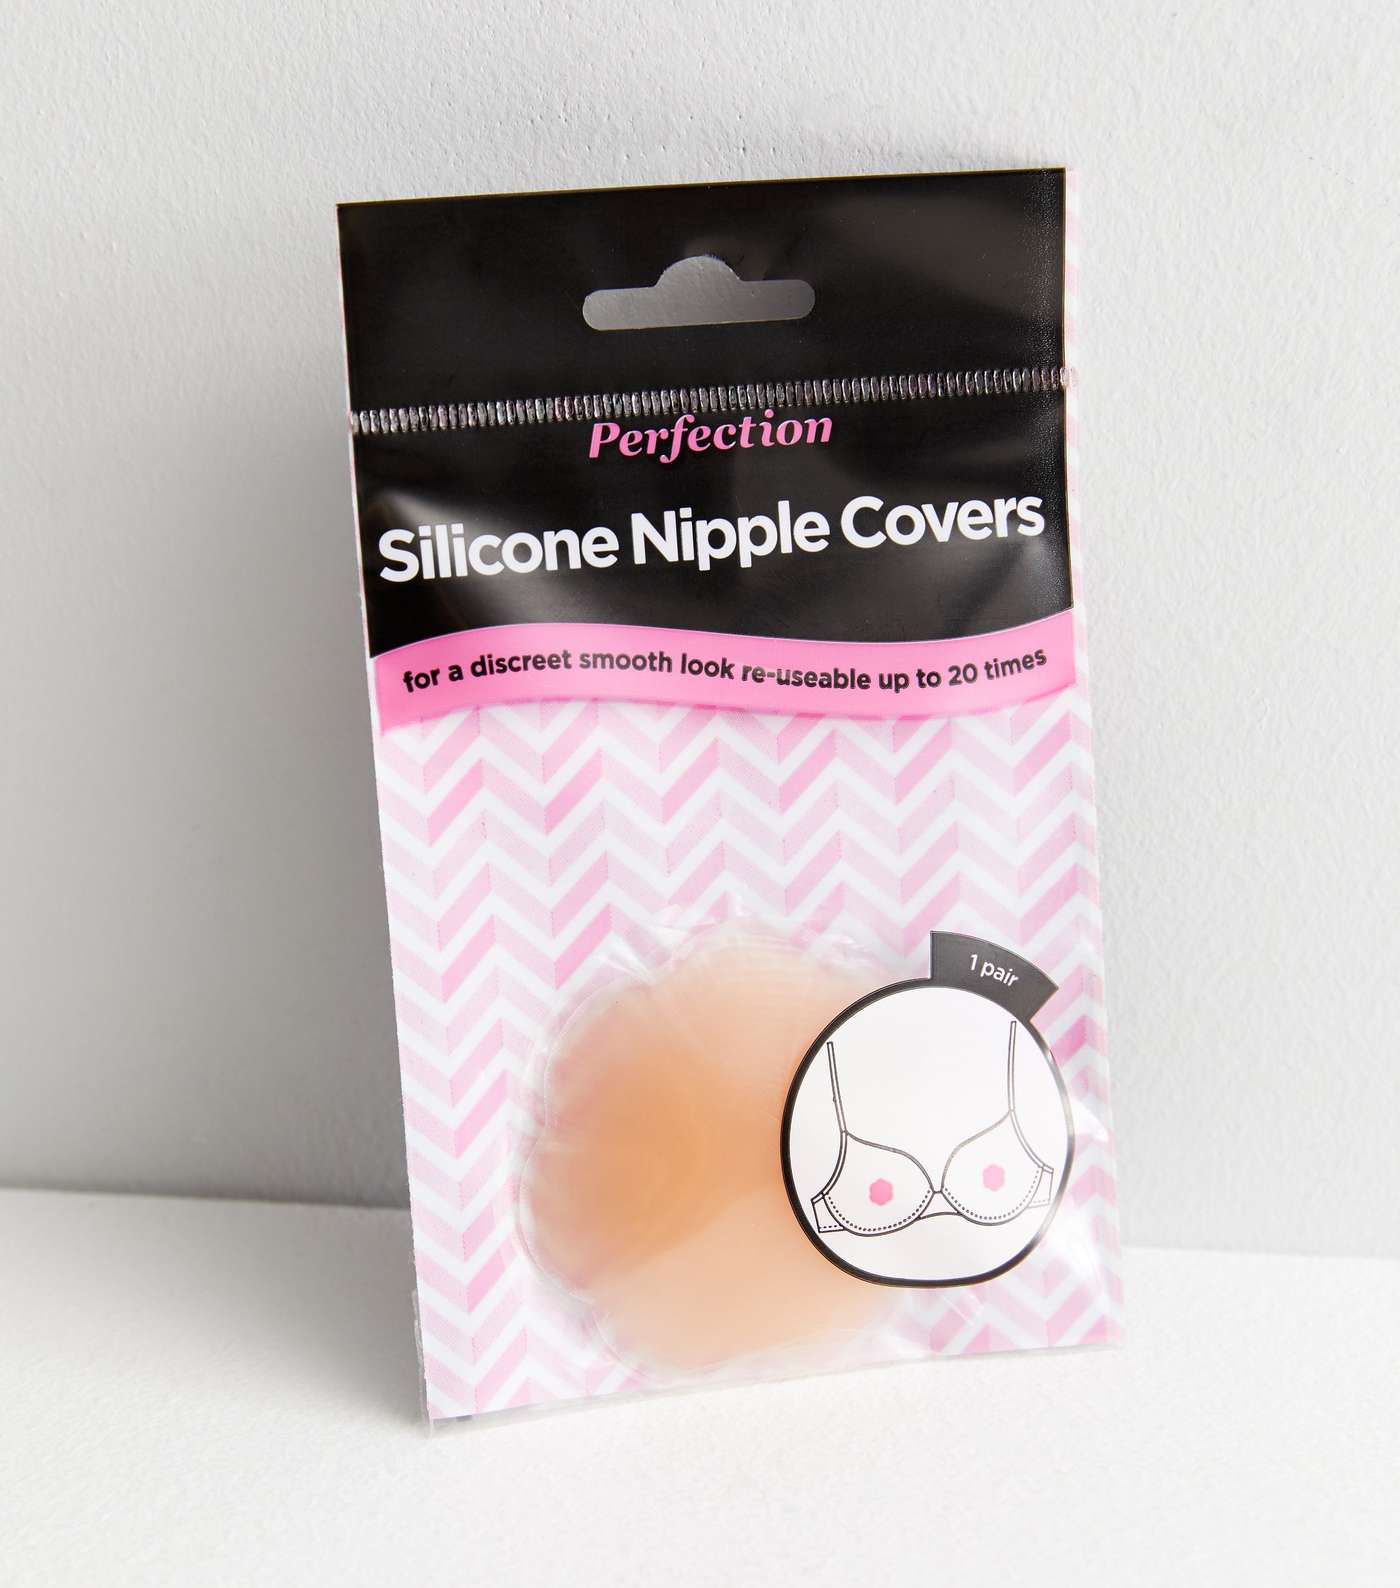 Perfection Beauty Pale Pink Silicone Nipple Covers